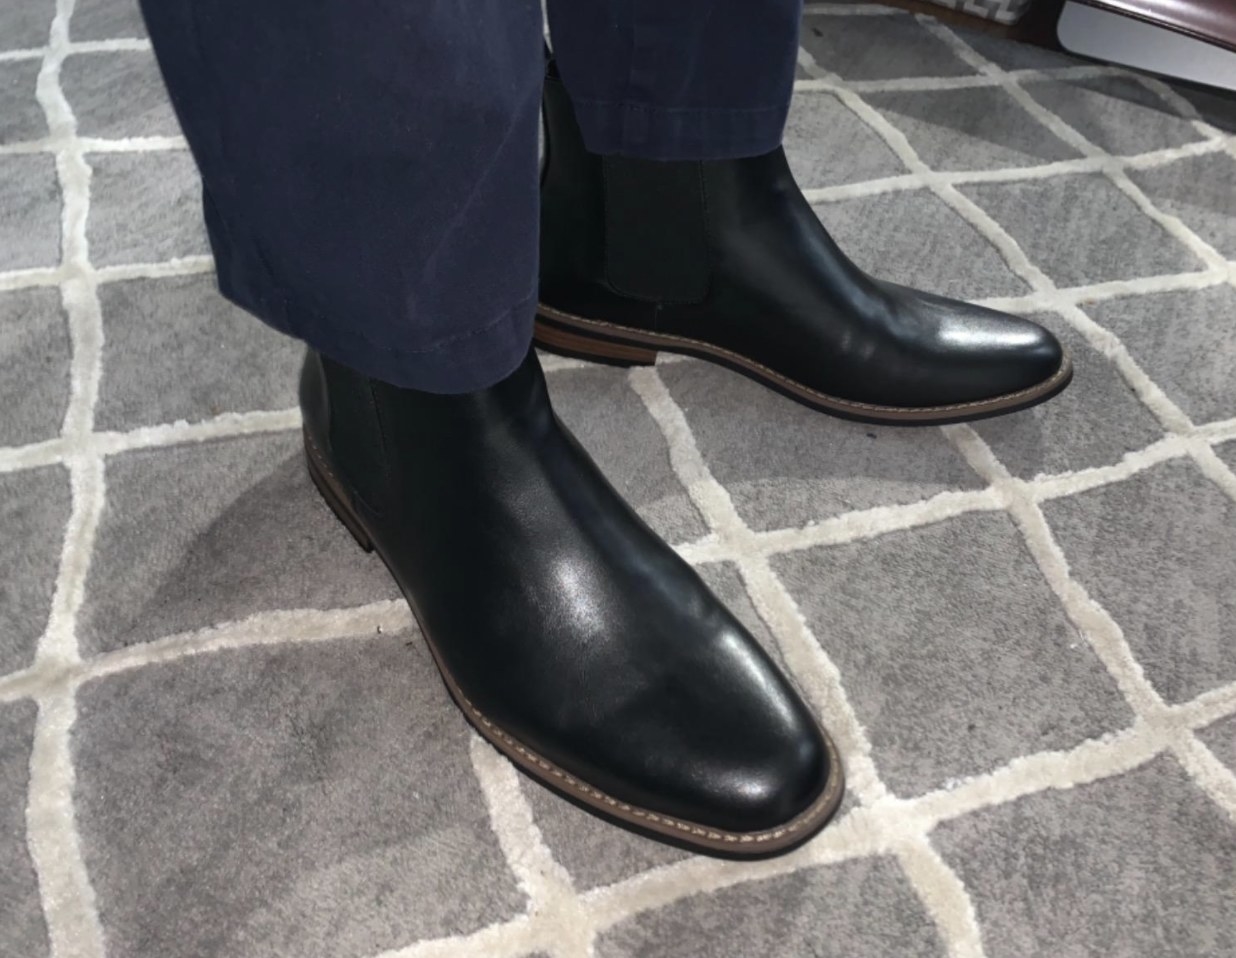 reviewer wearing the boots in black with navy pants